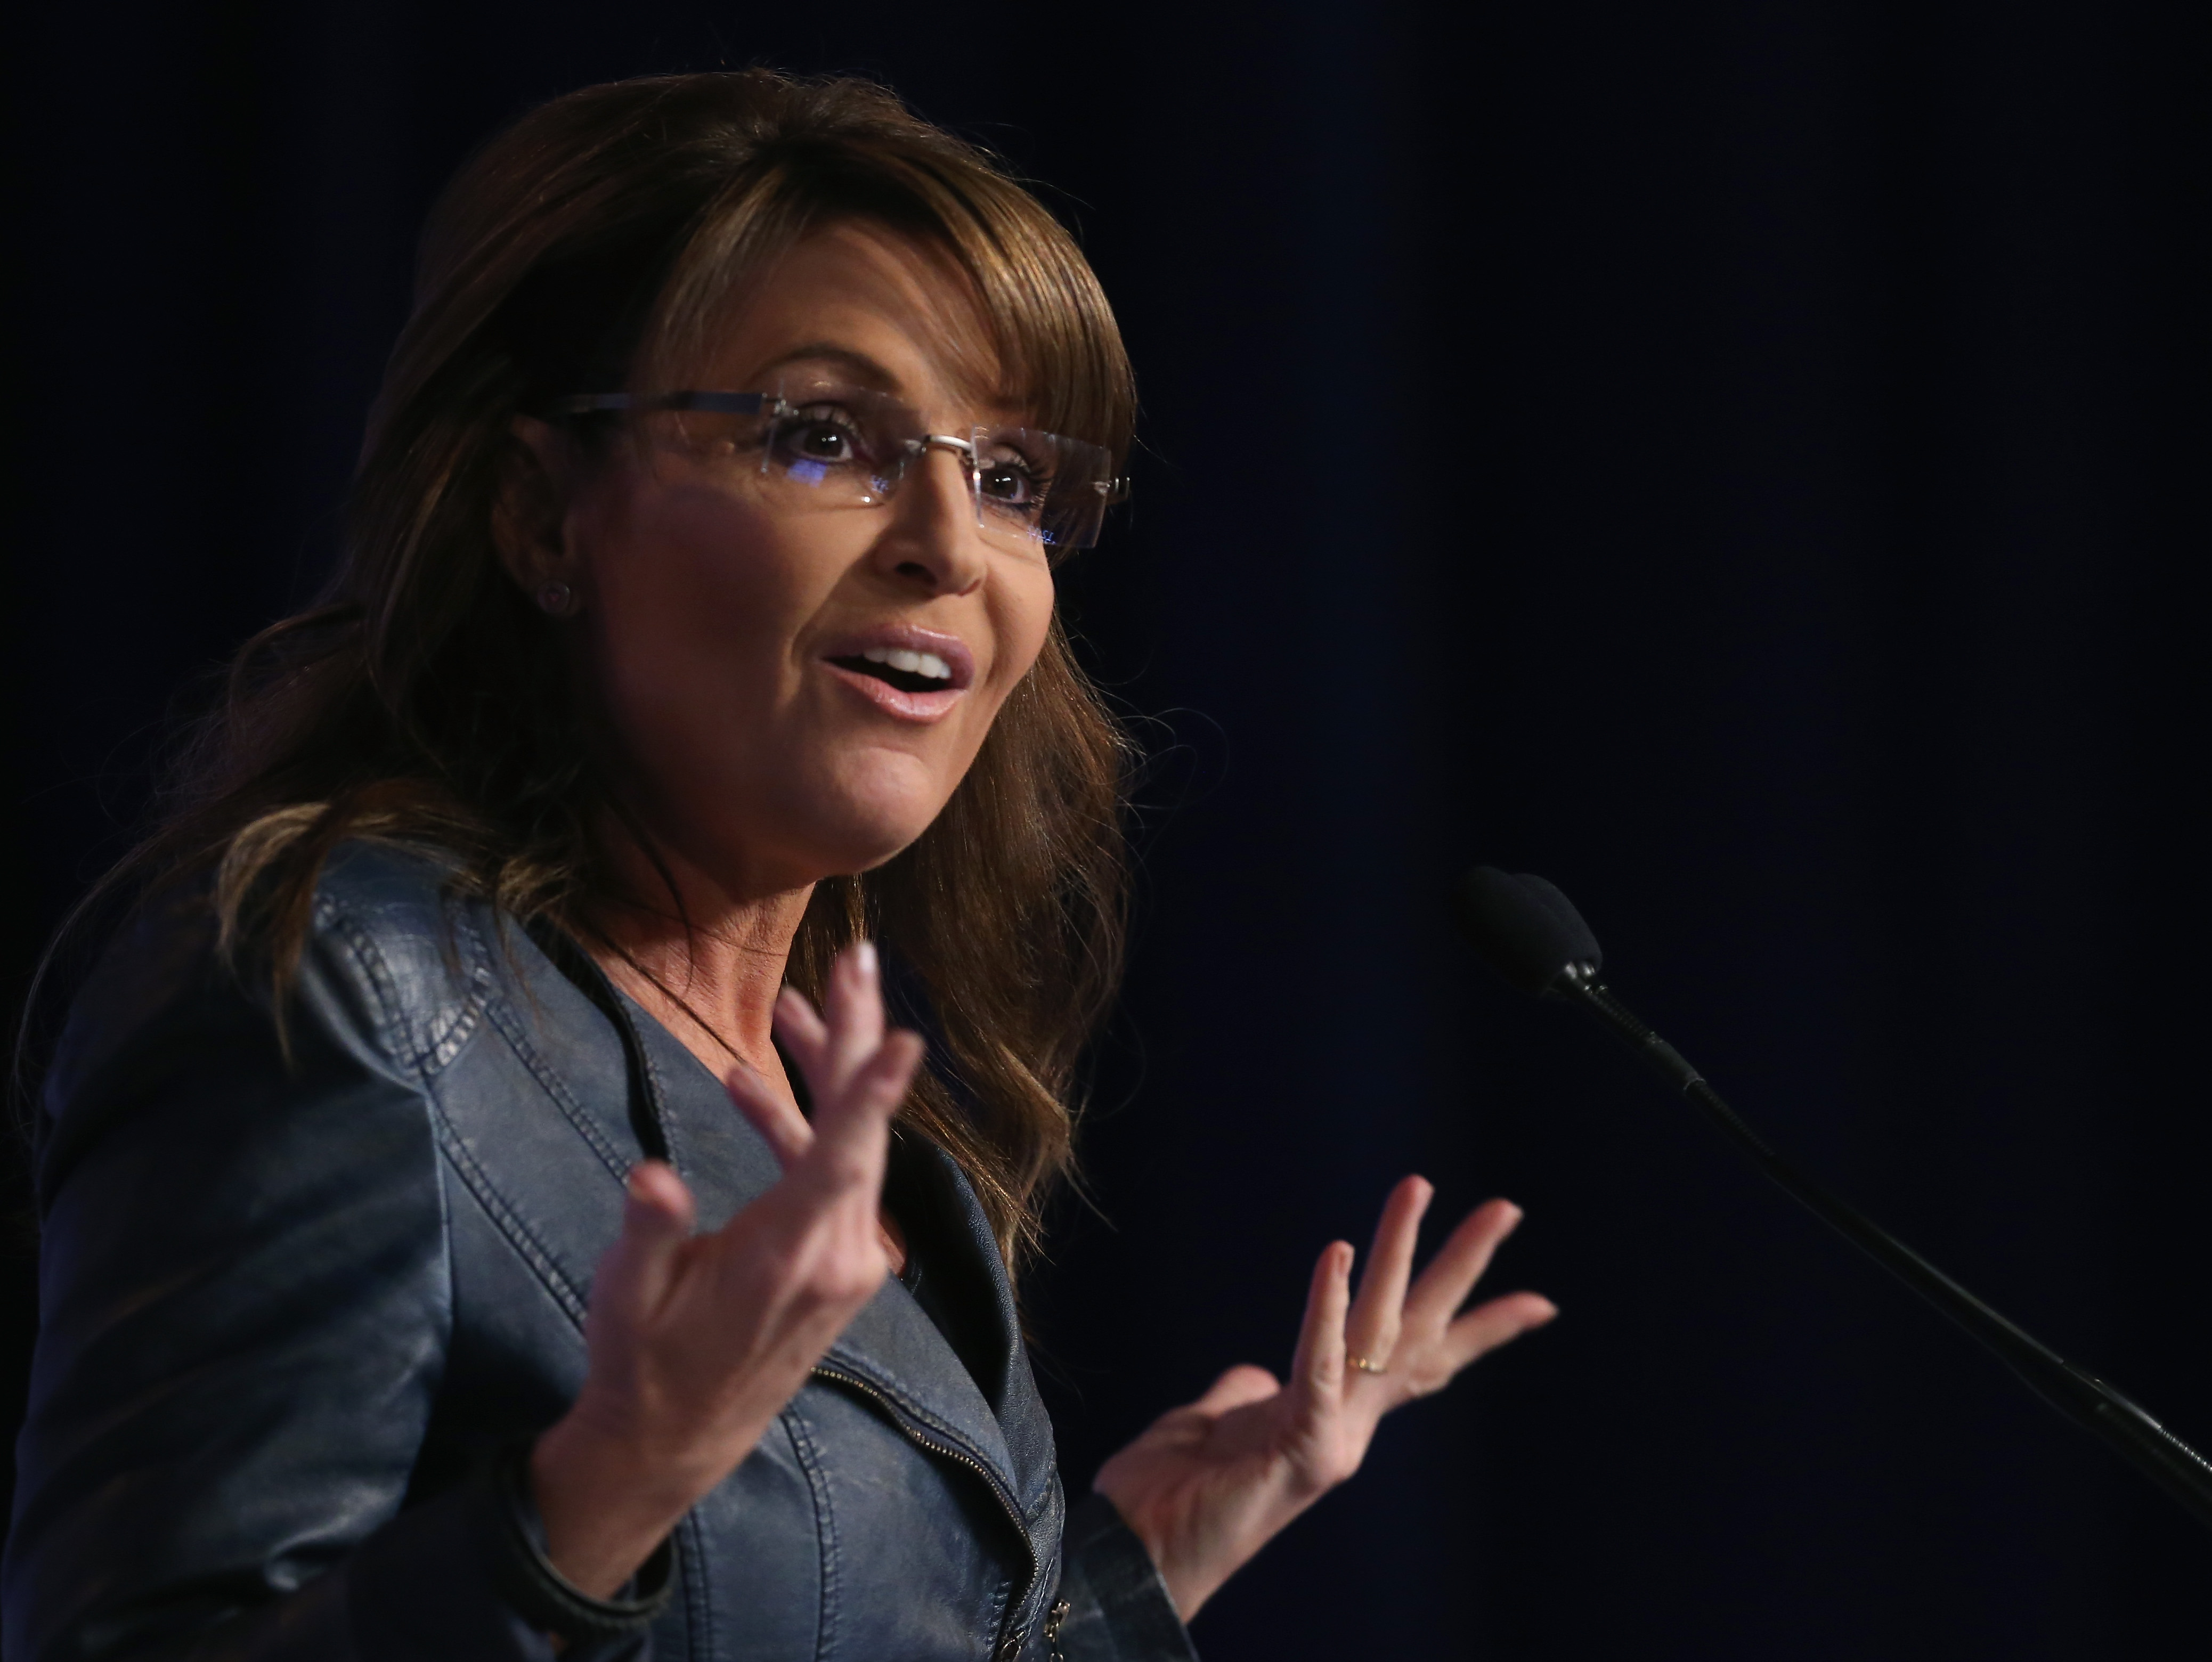 Sarah Palin speaks at the 2014 Values Voter Summit Sept. 26, 2014 in Washington, DC. (Mark Wilson—Getty Images)